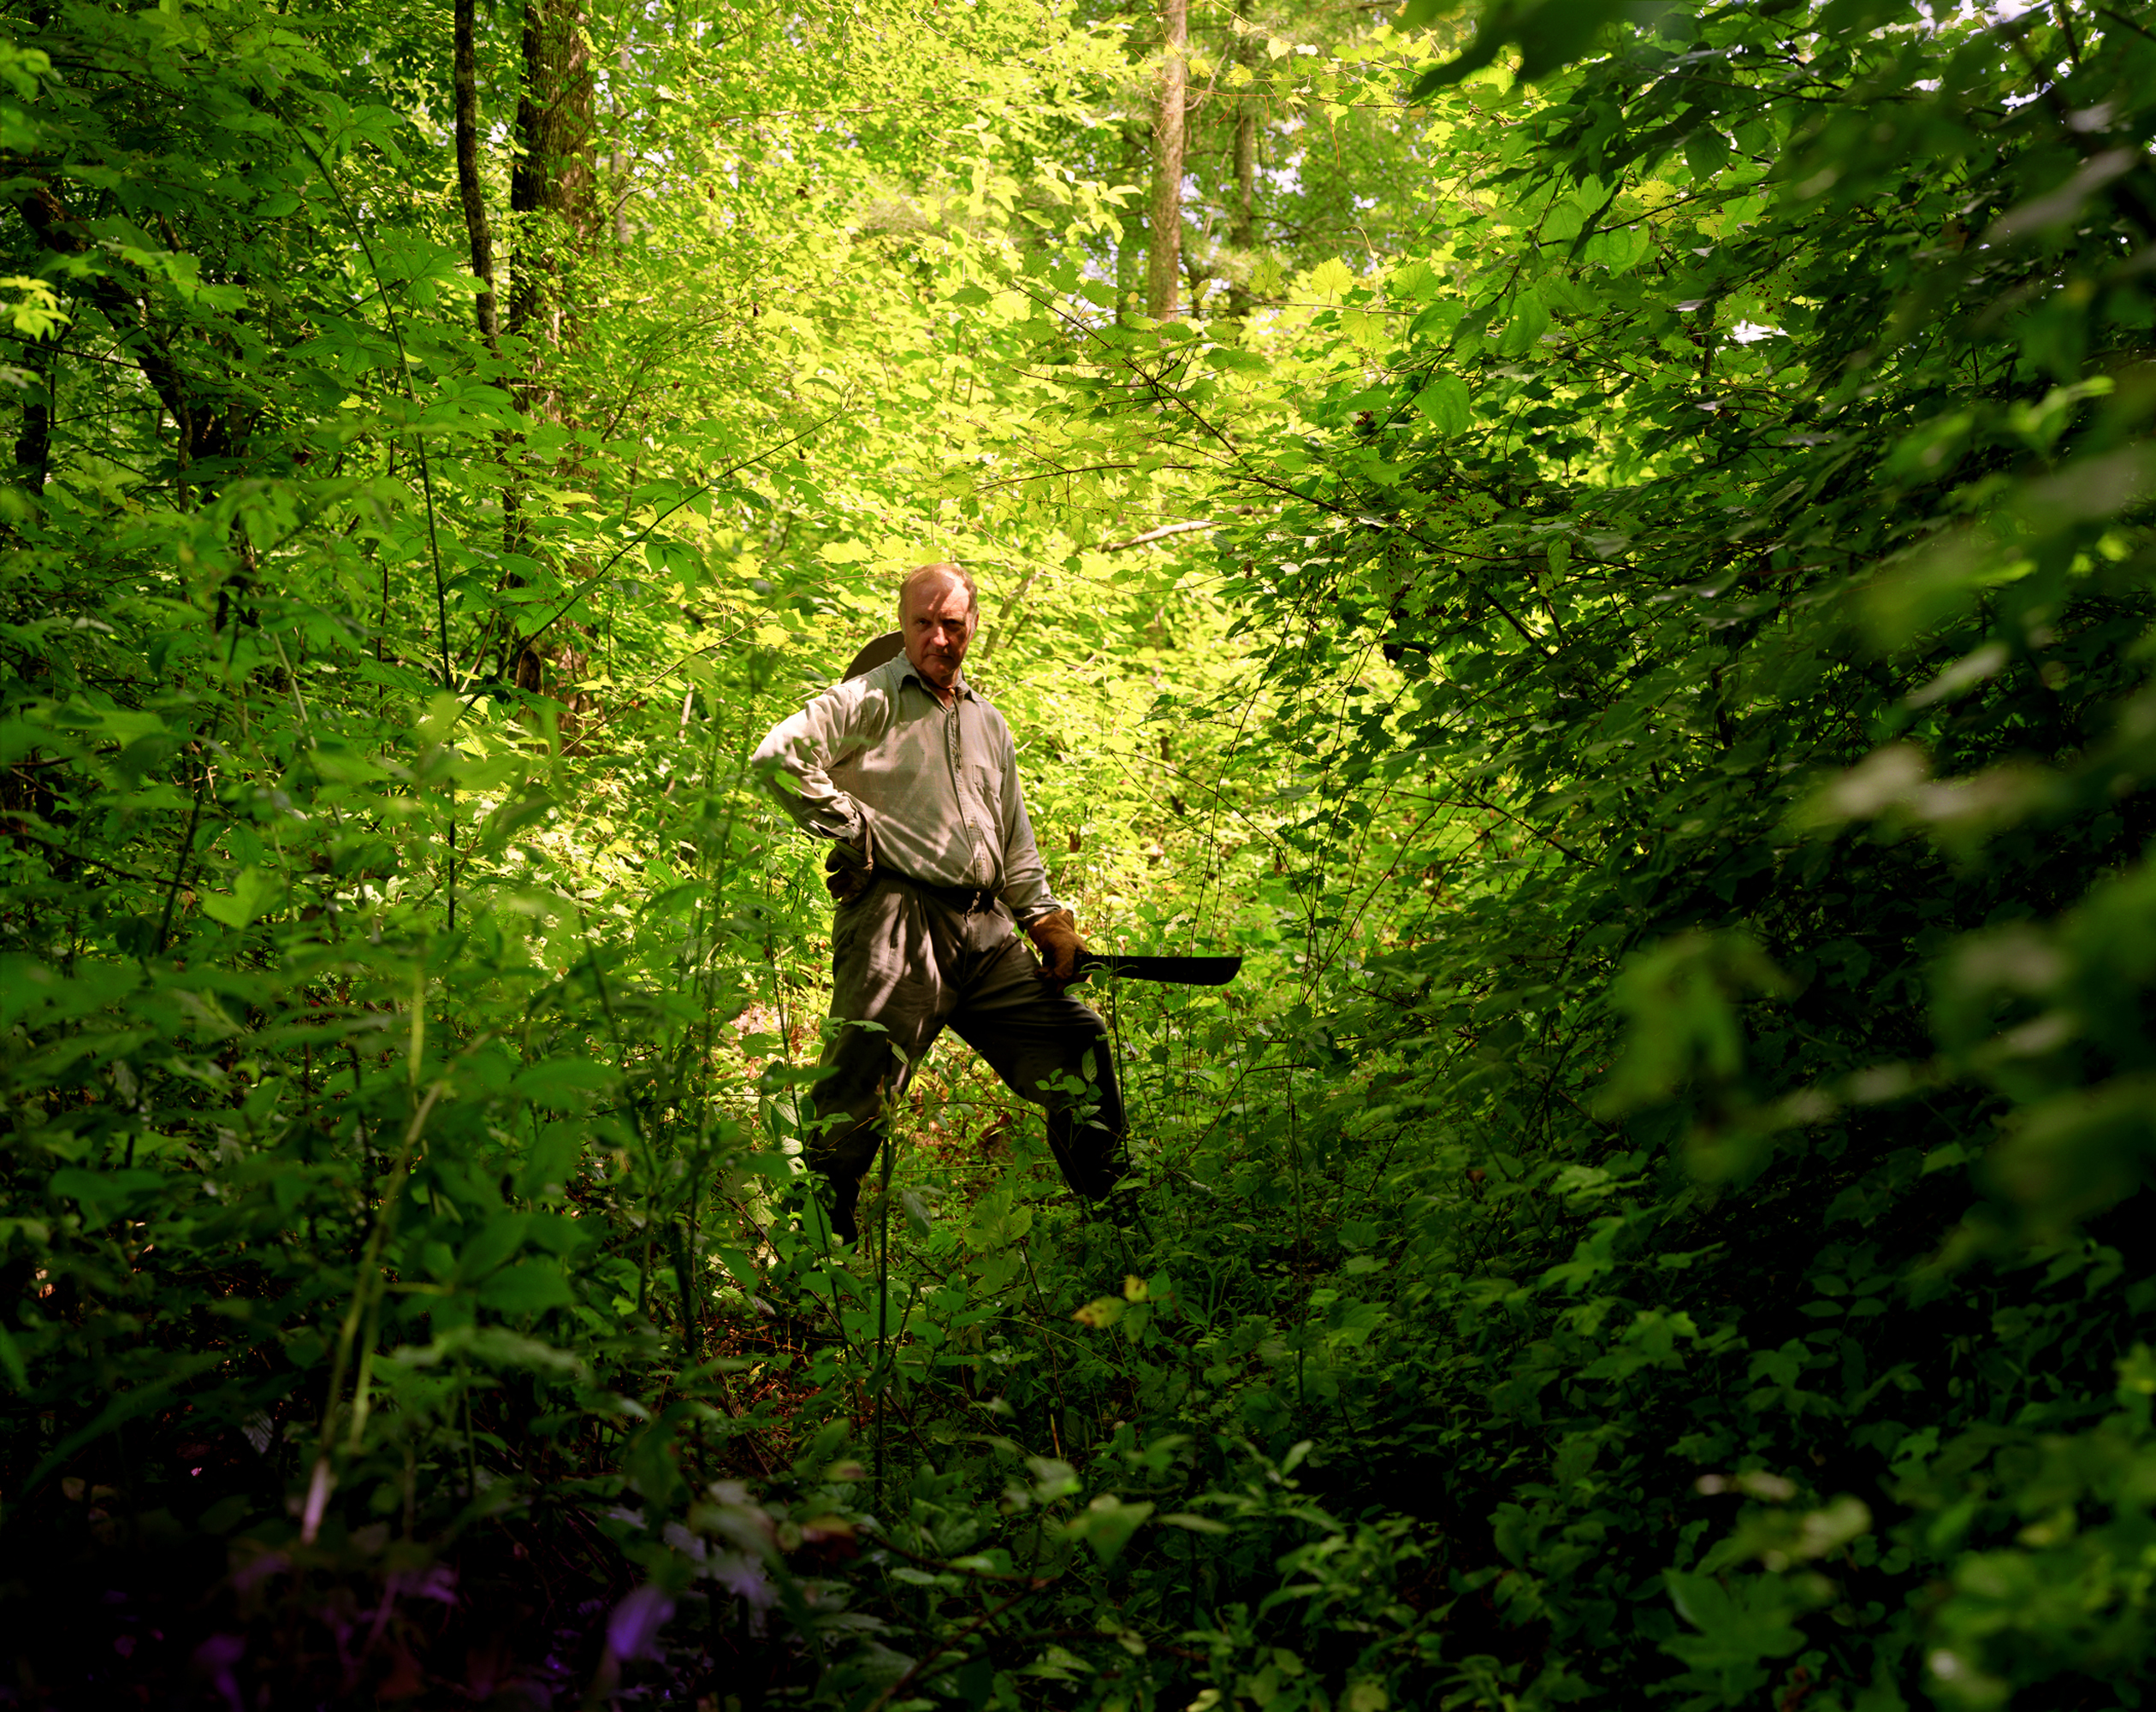 Man standing in the woods with a Machete